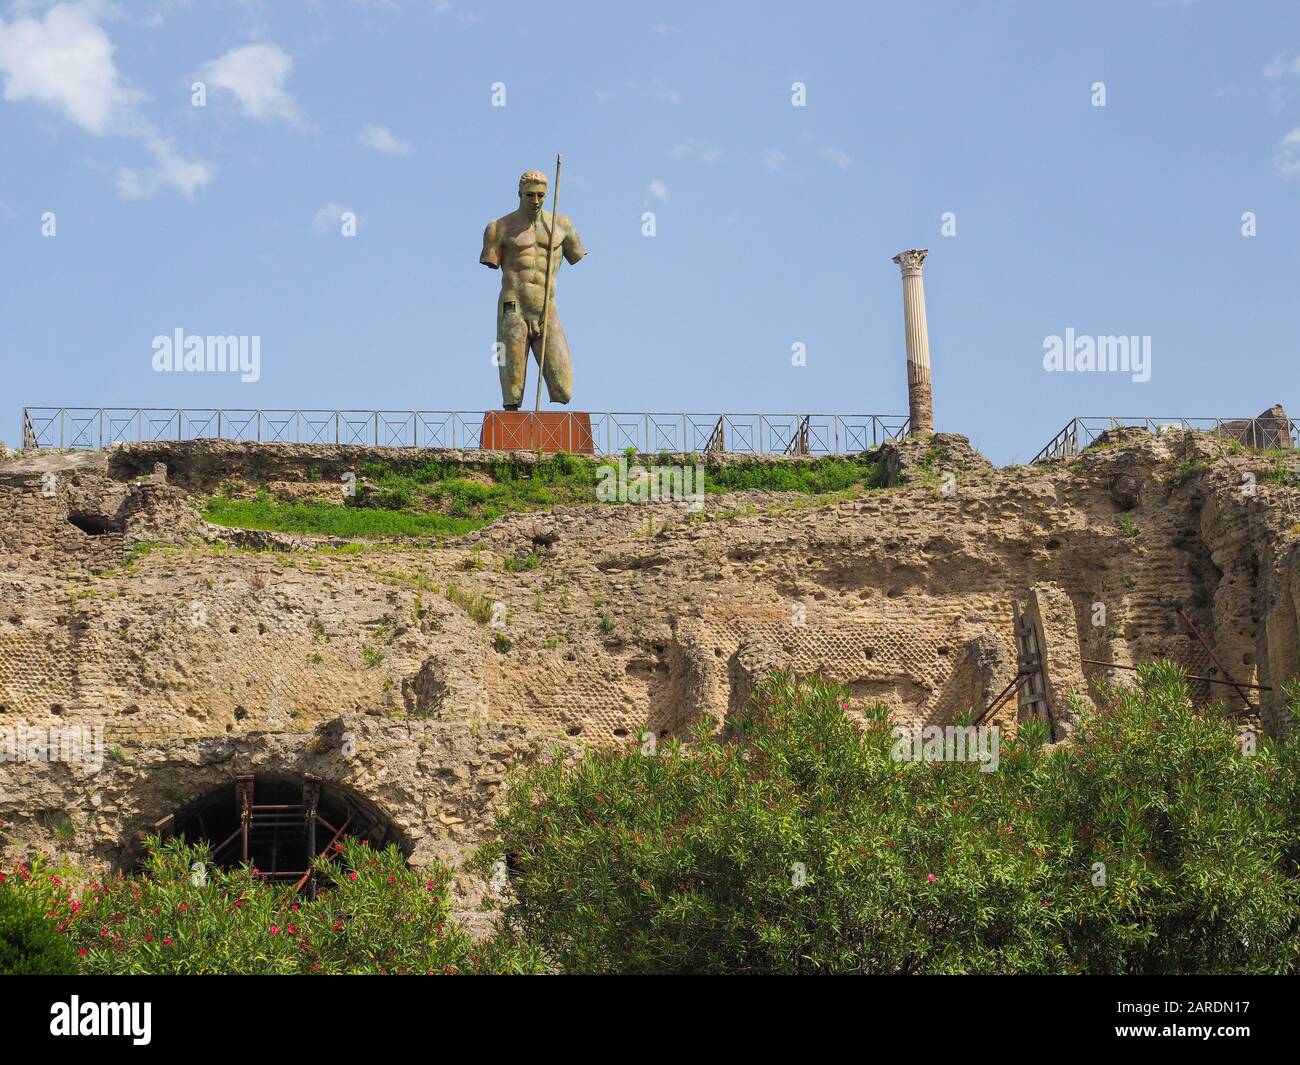 Igor Mitoraj's bronze man's classic sculpture over the ruins of Pompeii. Archaeological Area located near the modern town of Pompei and Mount Vesuvius Stock Photo